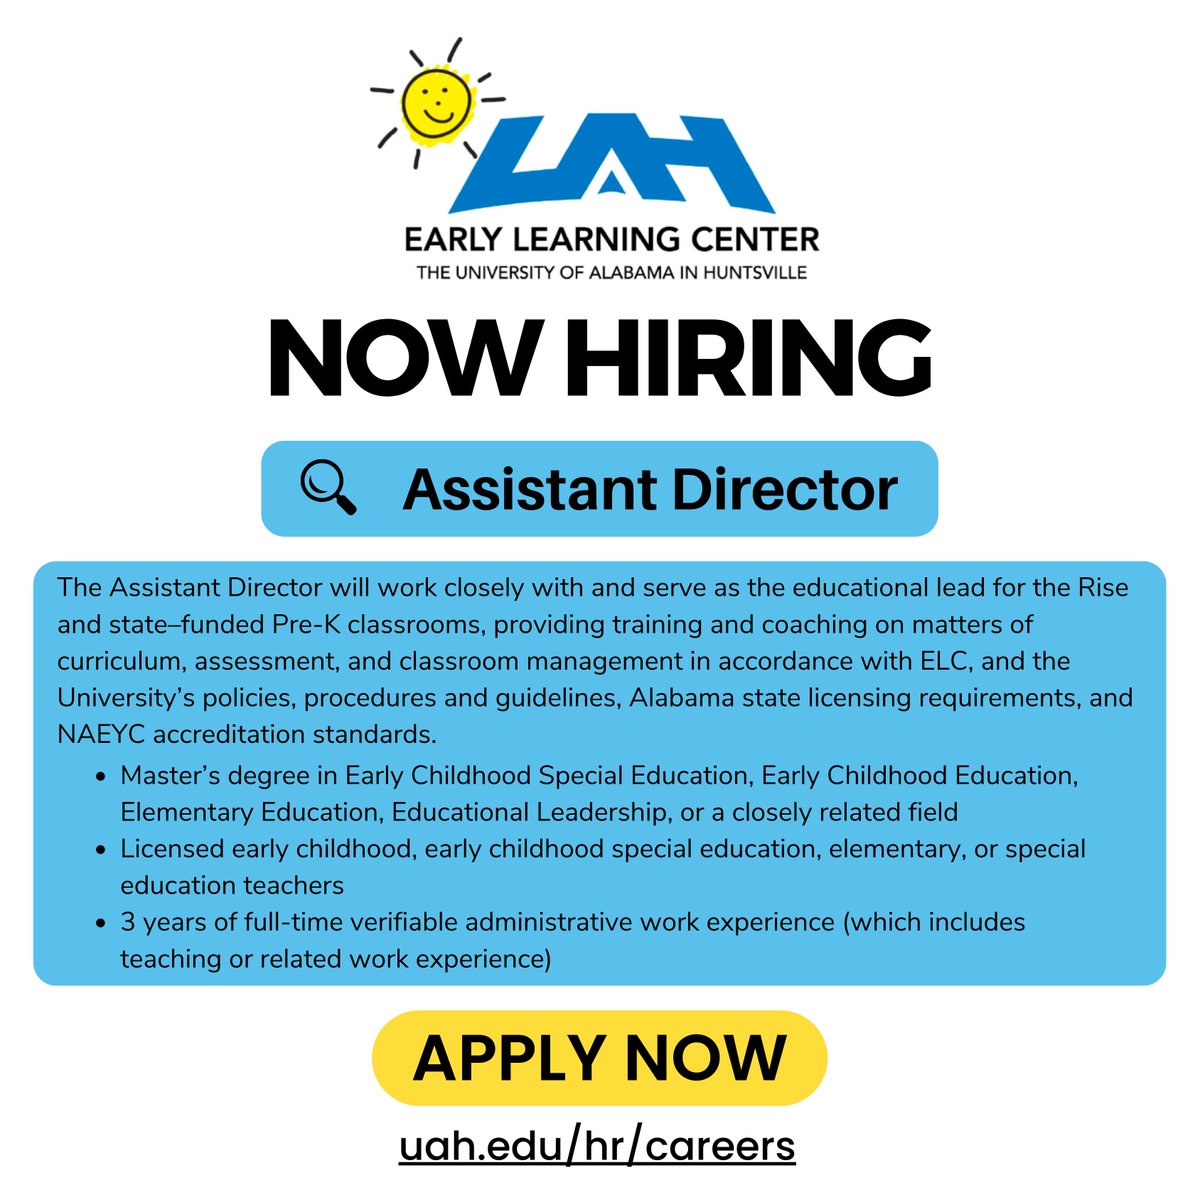 The UAH Early Learning Center is #hiring! 📣 Click here to learn more about the Assistant Director position and submit your application: careers.uah.edu/cw/en-us/job/4…

#jobopportunity #huntsville #huntsvillealabama #earlychildhoodeducator #nowhiring #ApplyNow #HuntsvilleJobs